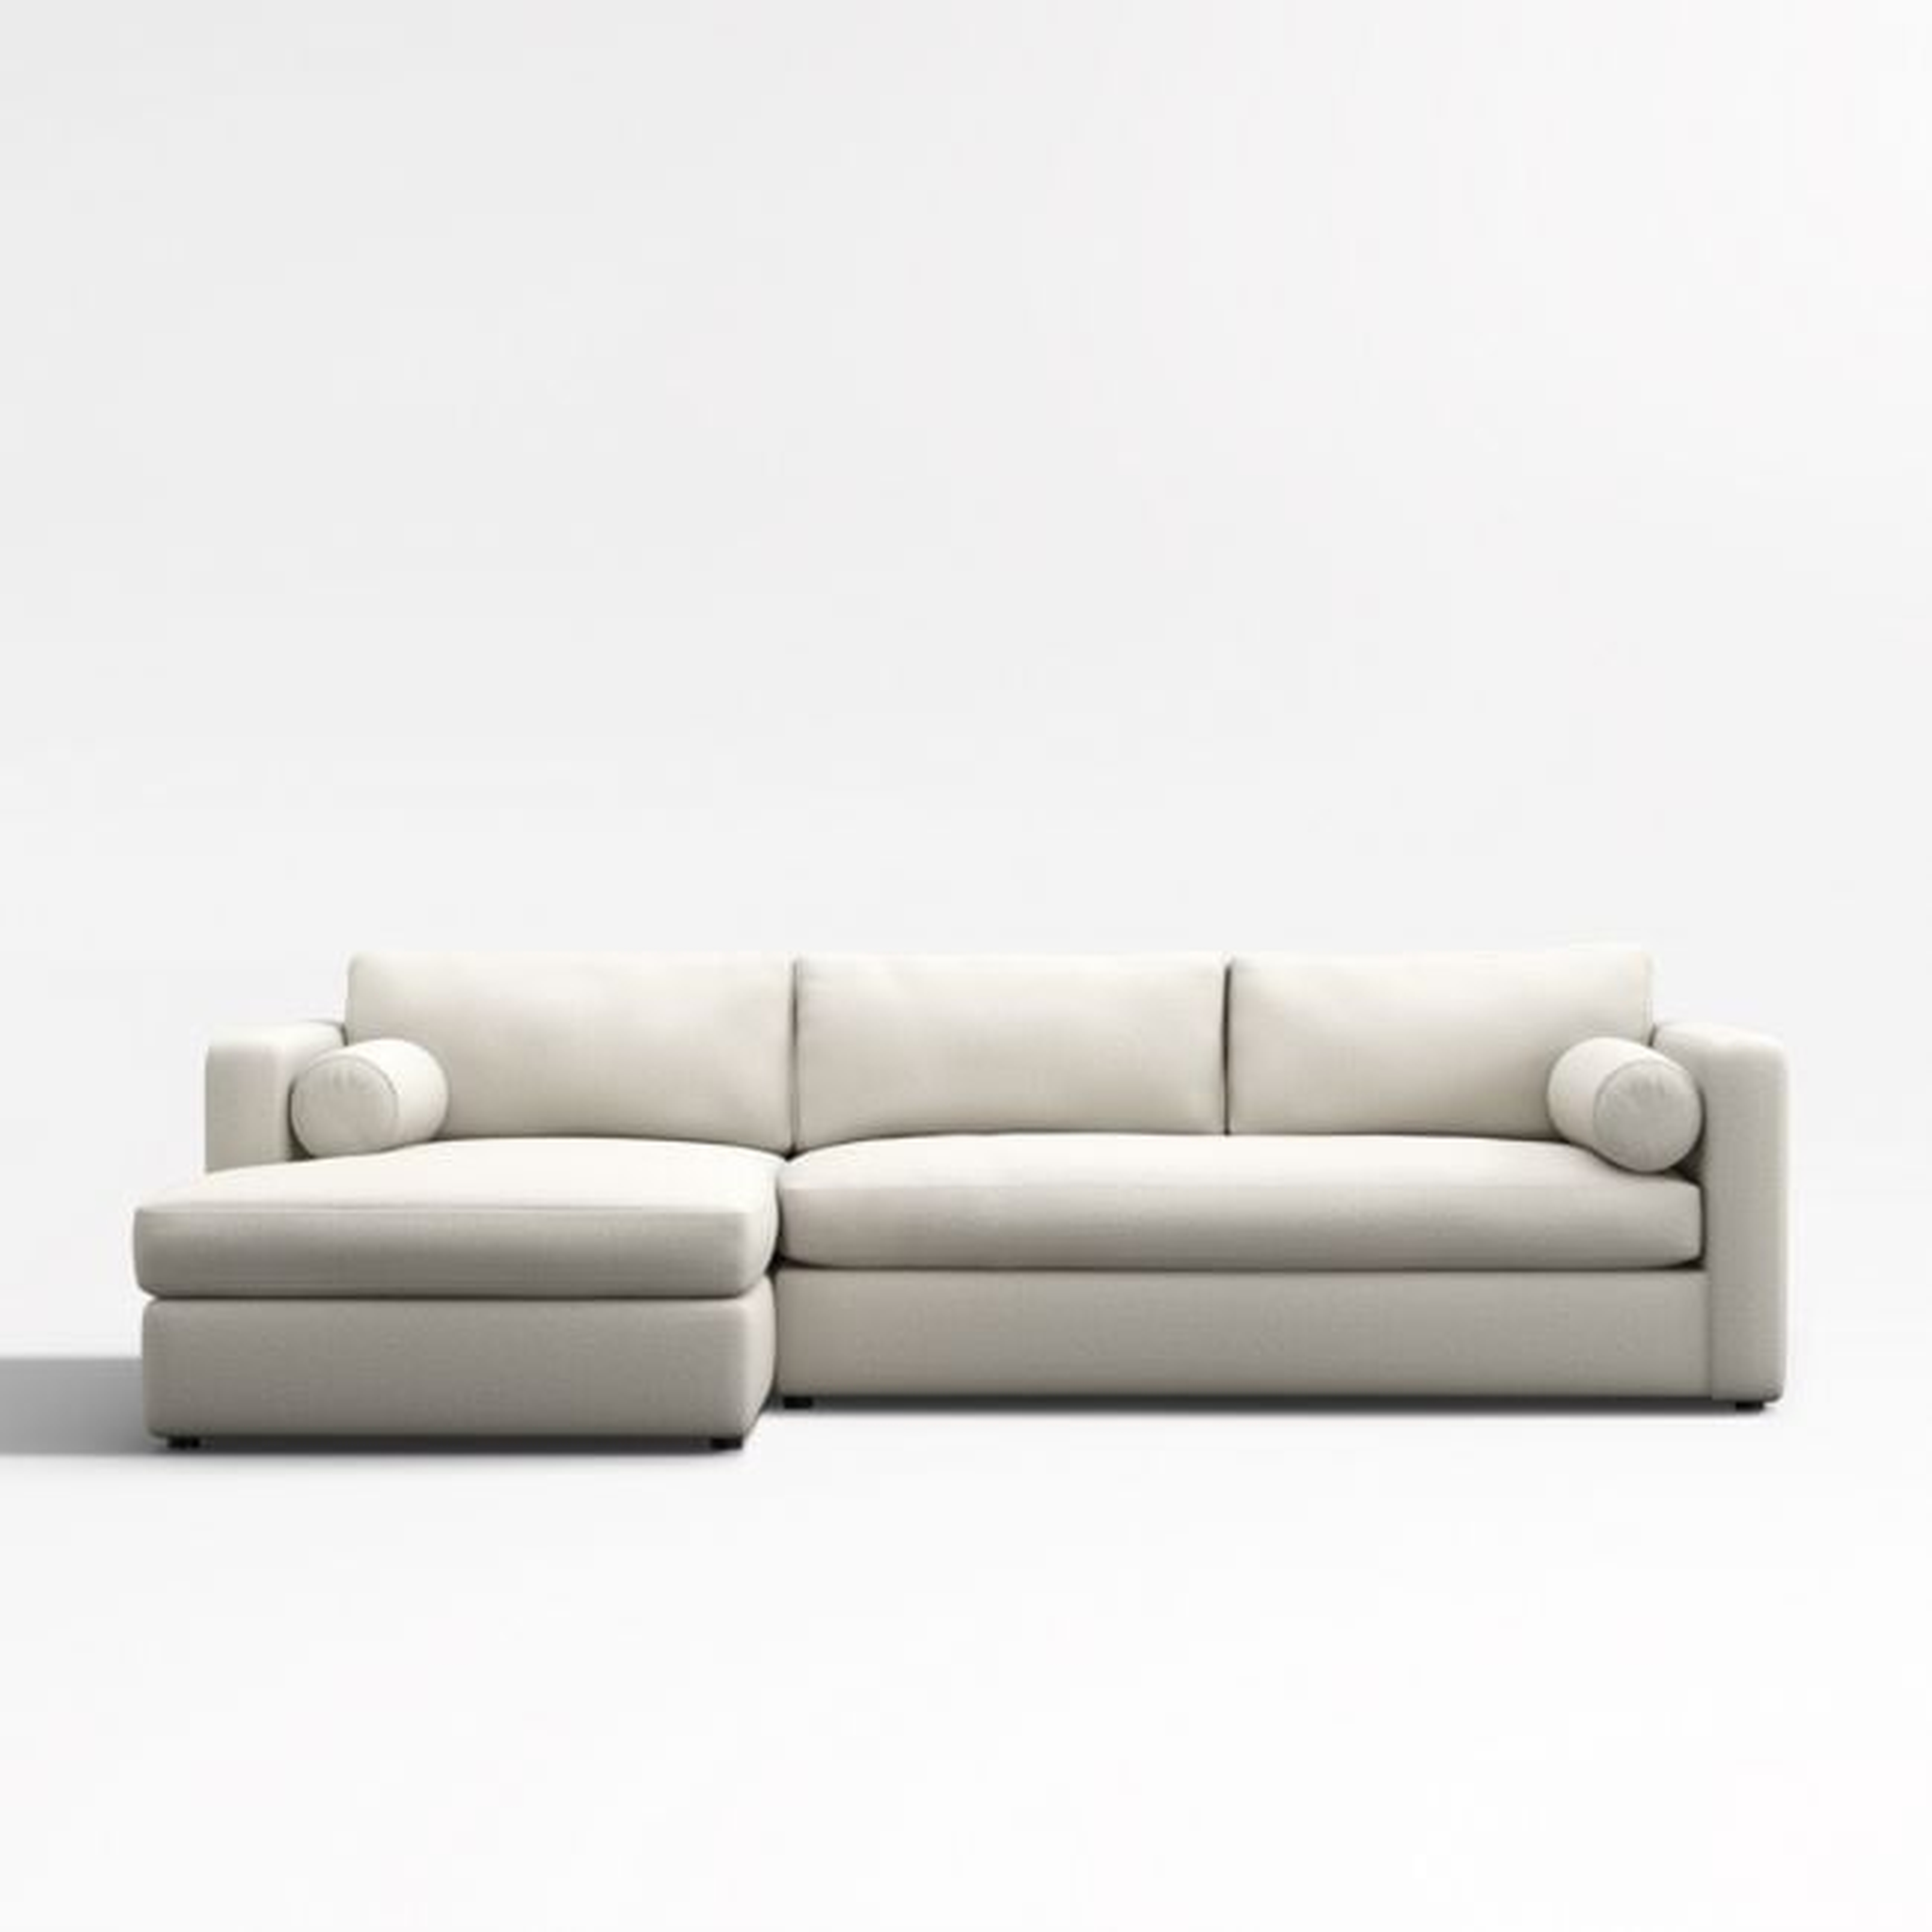 Aris 2-Piece Left-Arm Chaise Sectional - Crate and Barrel